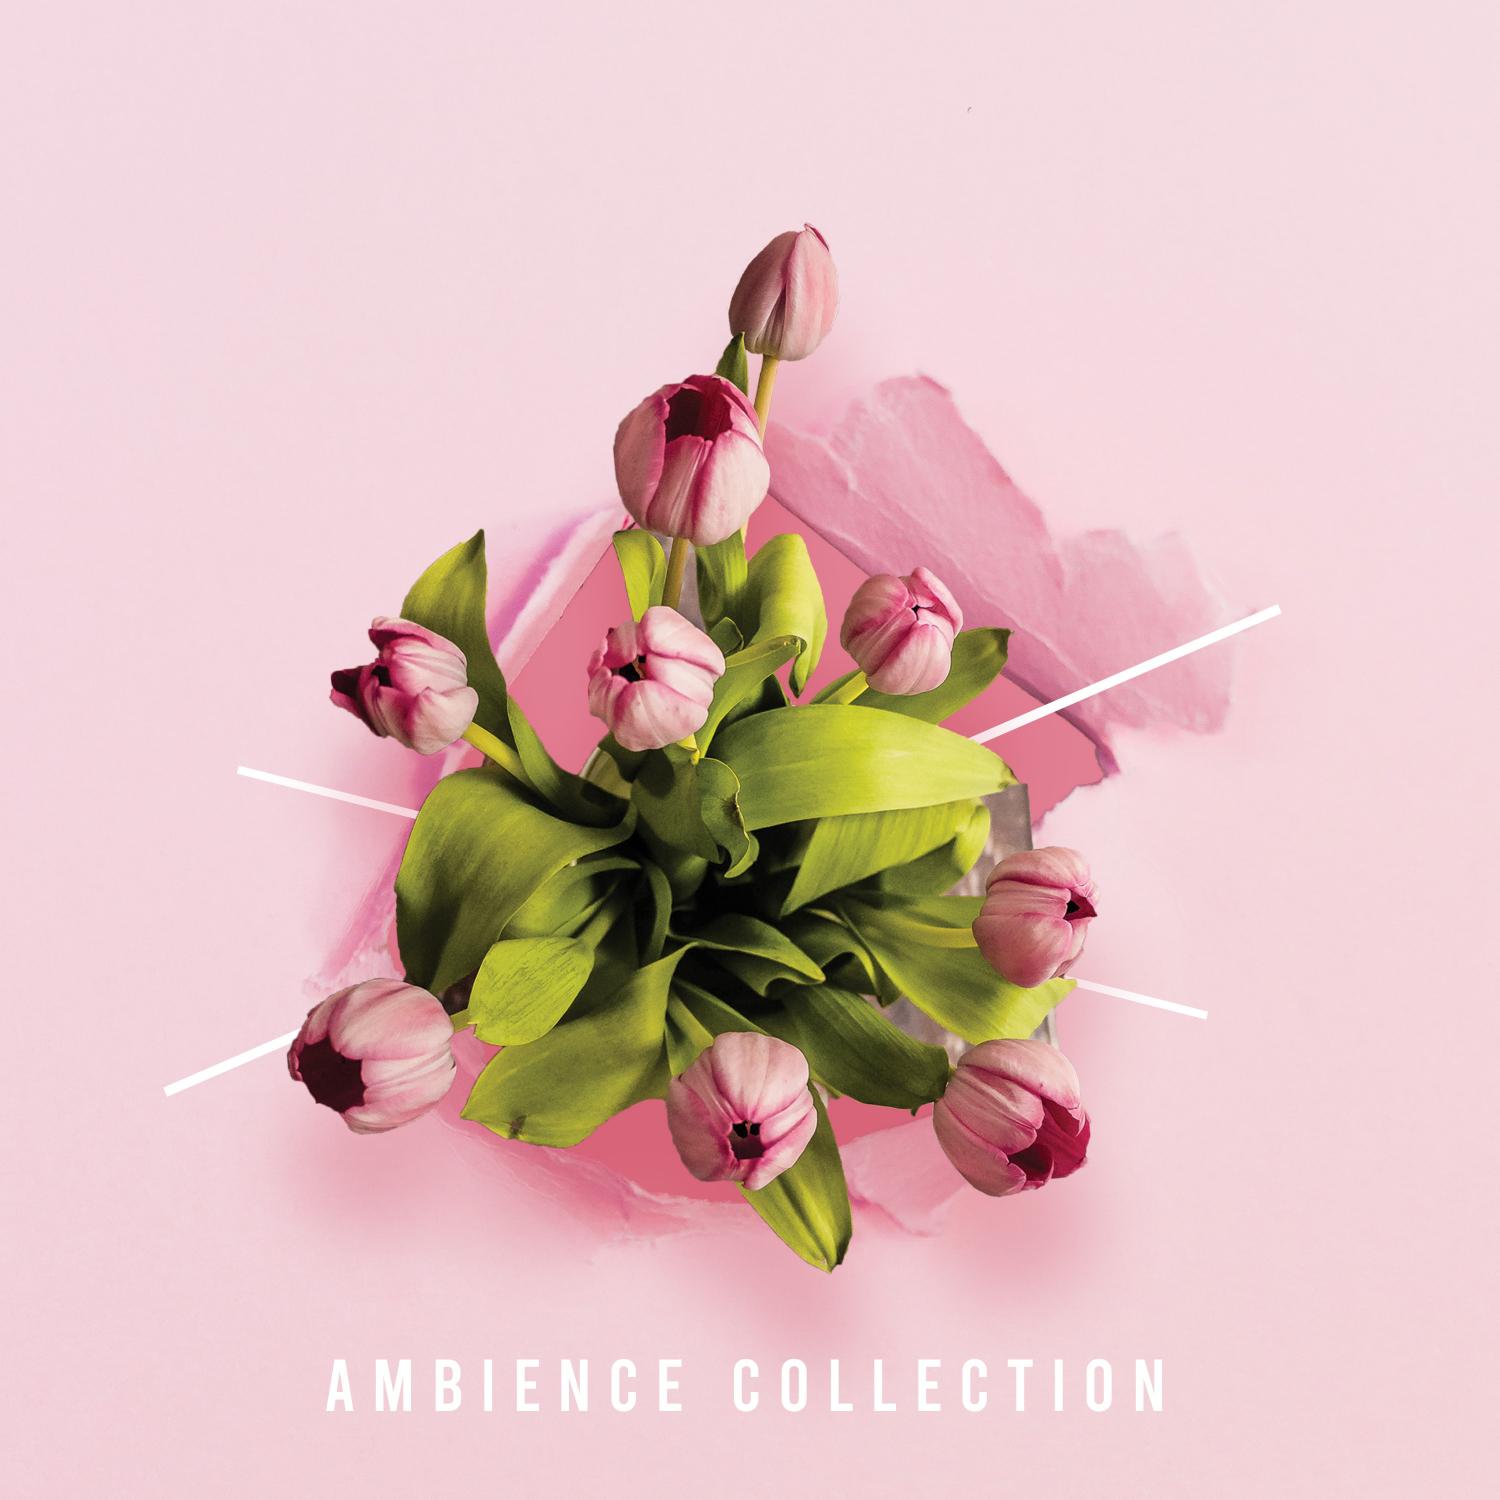 2018 Ambience Collection. Zen Relaxation with White Noise and Natural Meditation Sounds